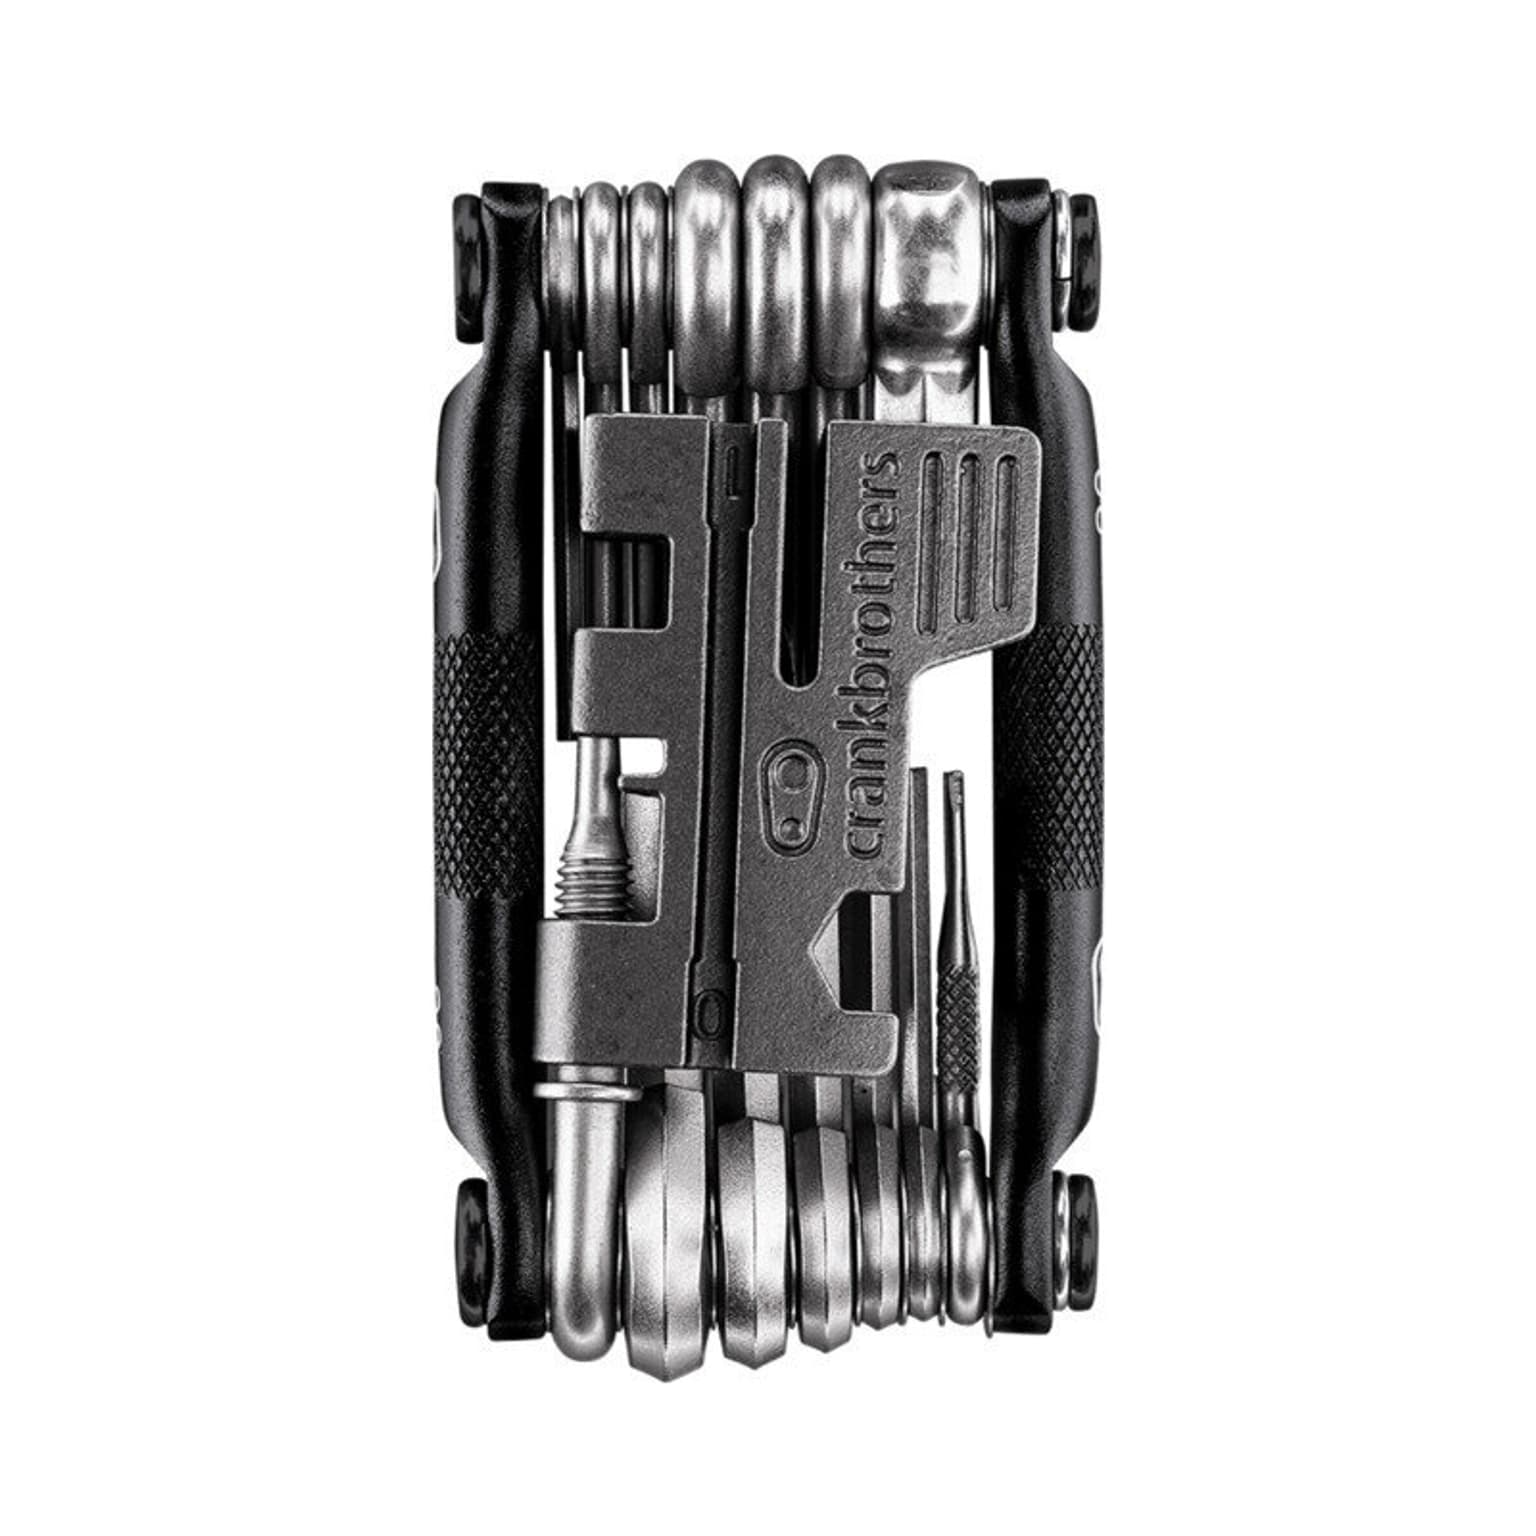 crankbrothers crankbrothers Multitool 20 matt Jeu d'outils pour bicyclette 2